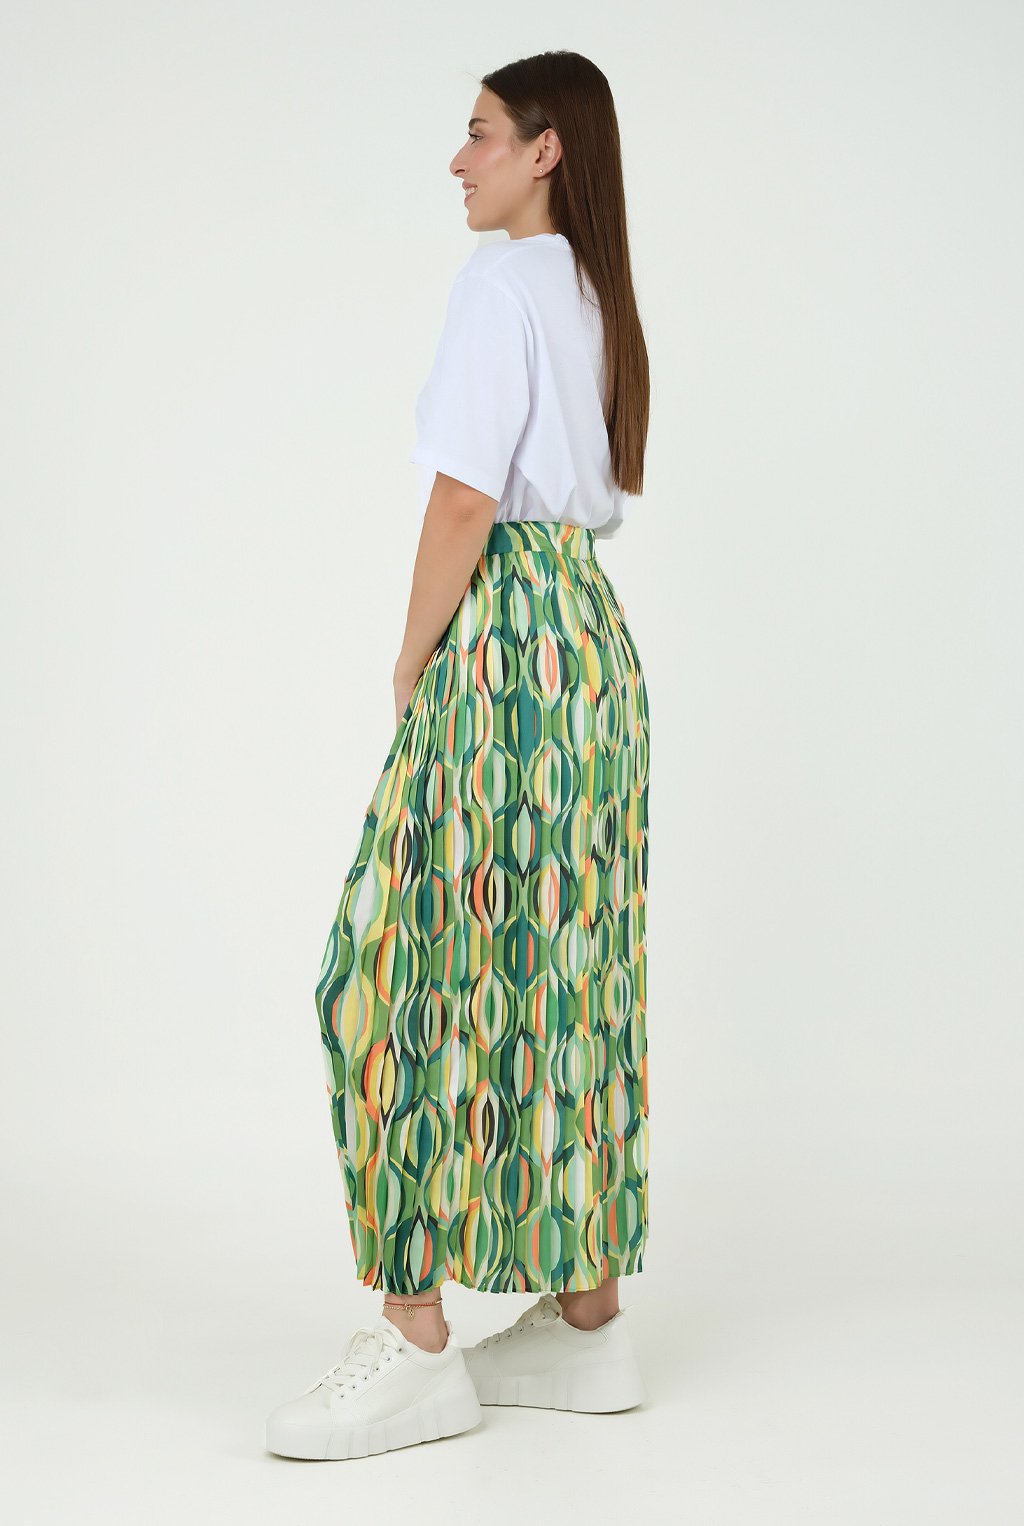 Onion Patterned Pleated Skirt Green 